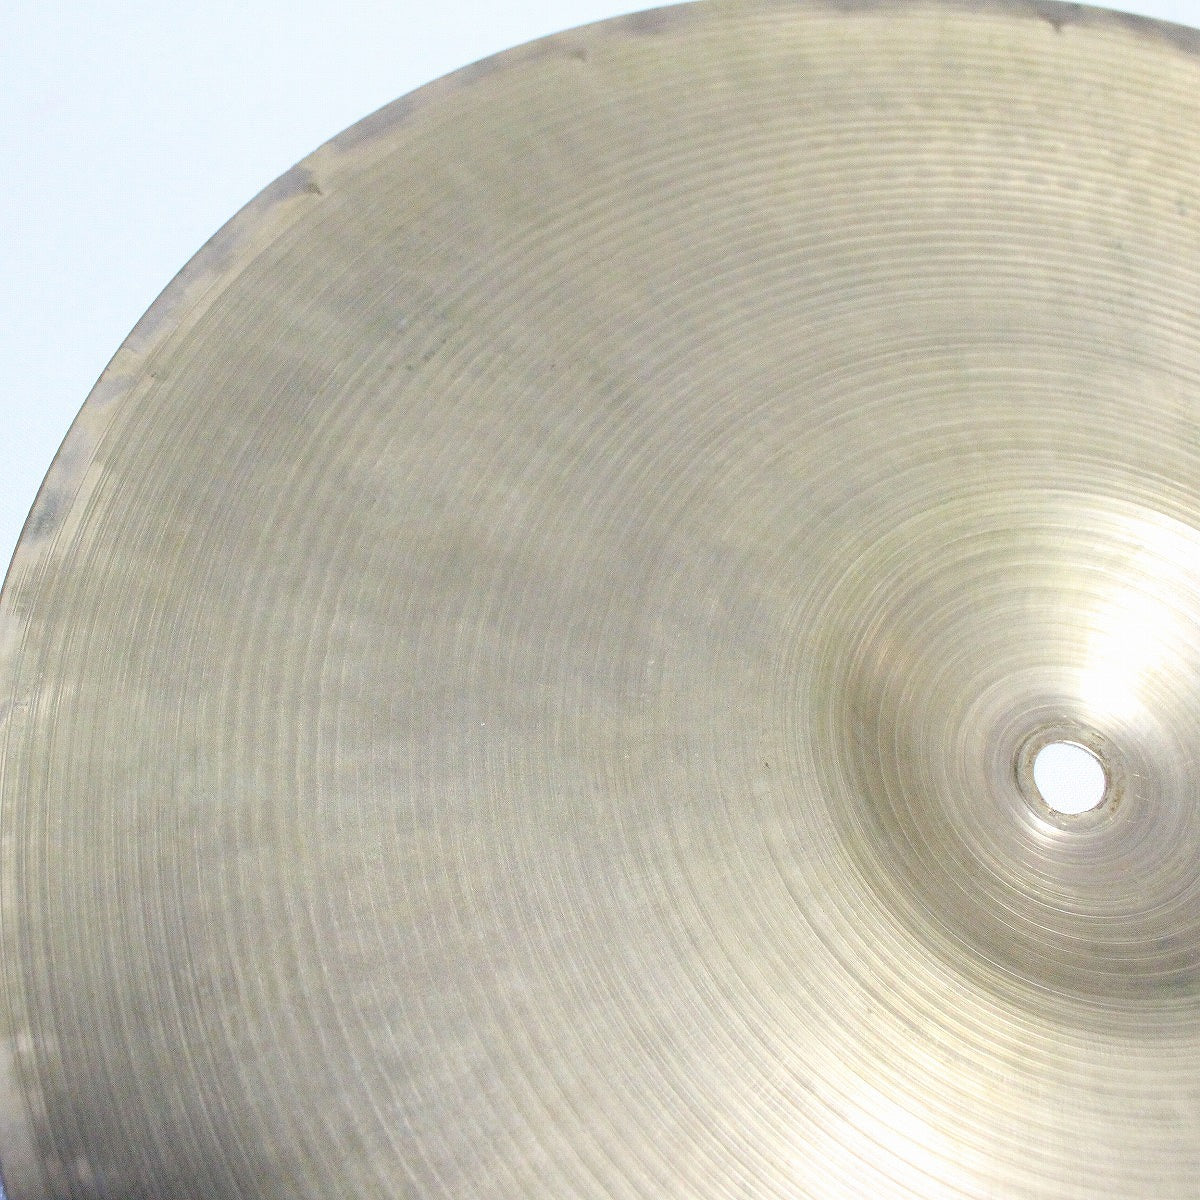 USED ZILDJIAN / Late50s A Small Stamp 14" HIHAT 736/868g Old A Hi-Hat Cymbal [08]